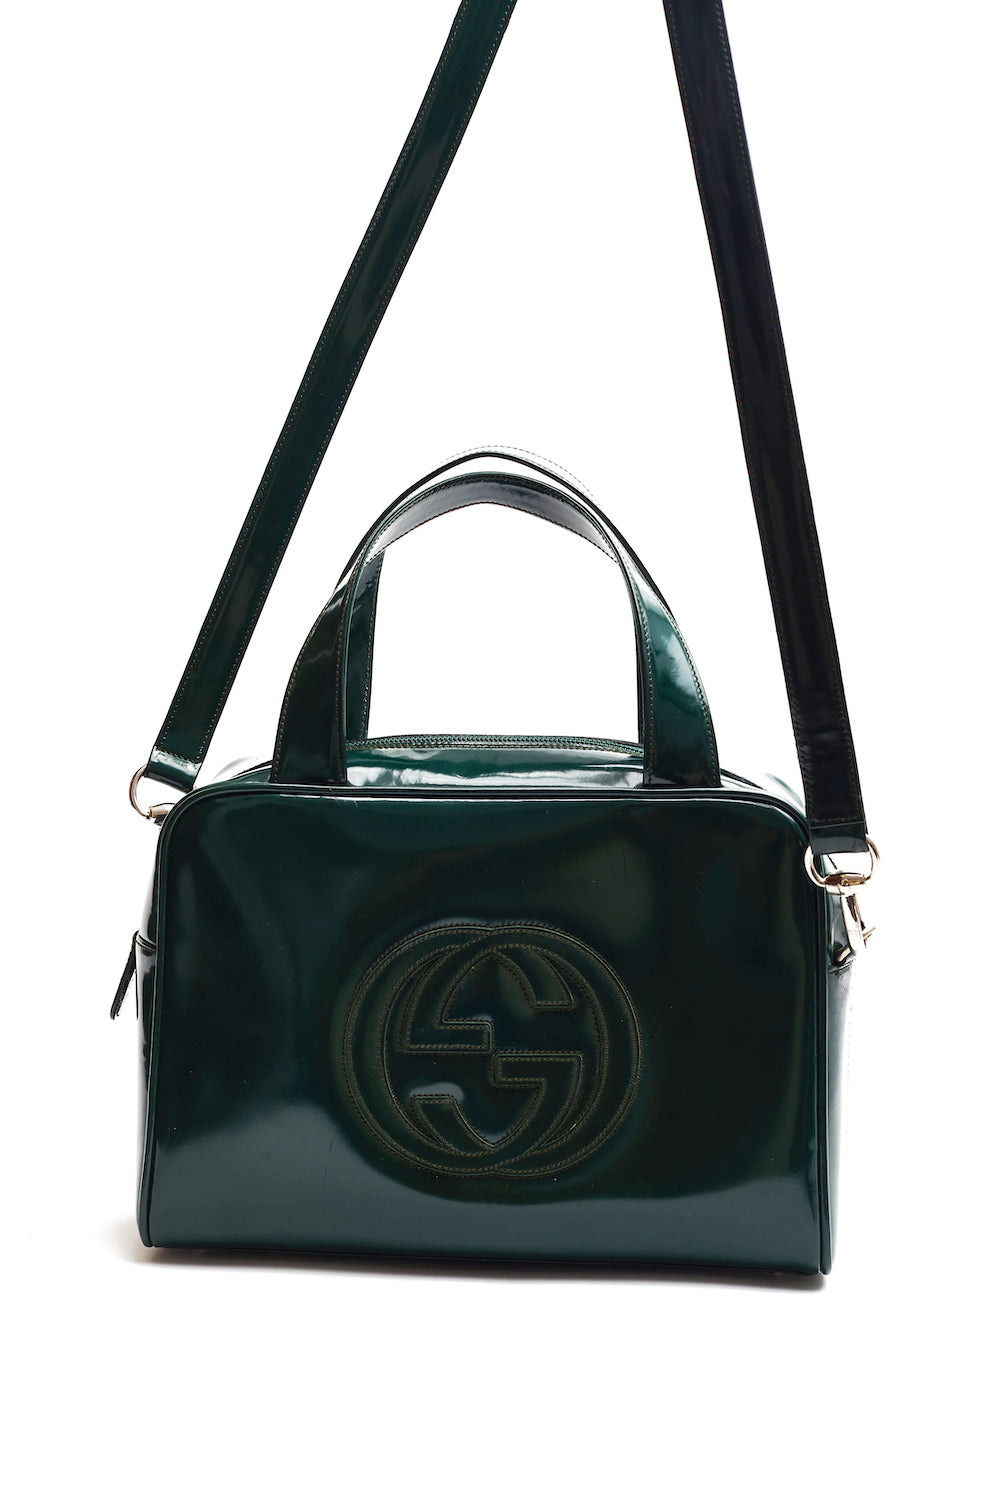 Gucci <br> 90's Gucci by Tom Ford two way patent leather logo bag